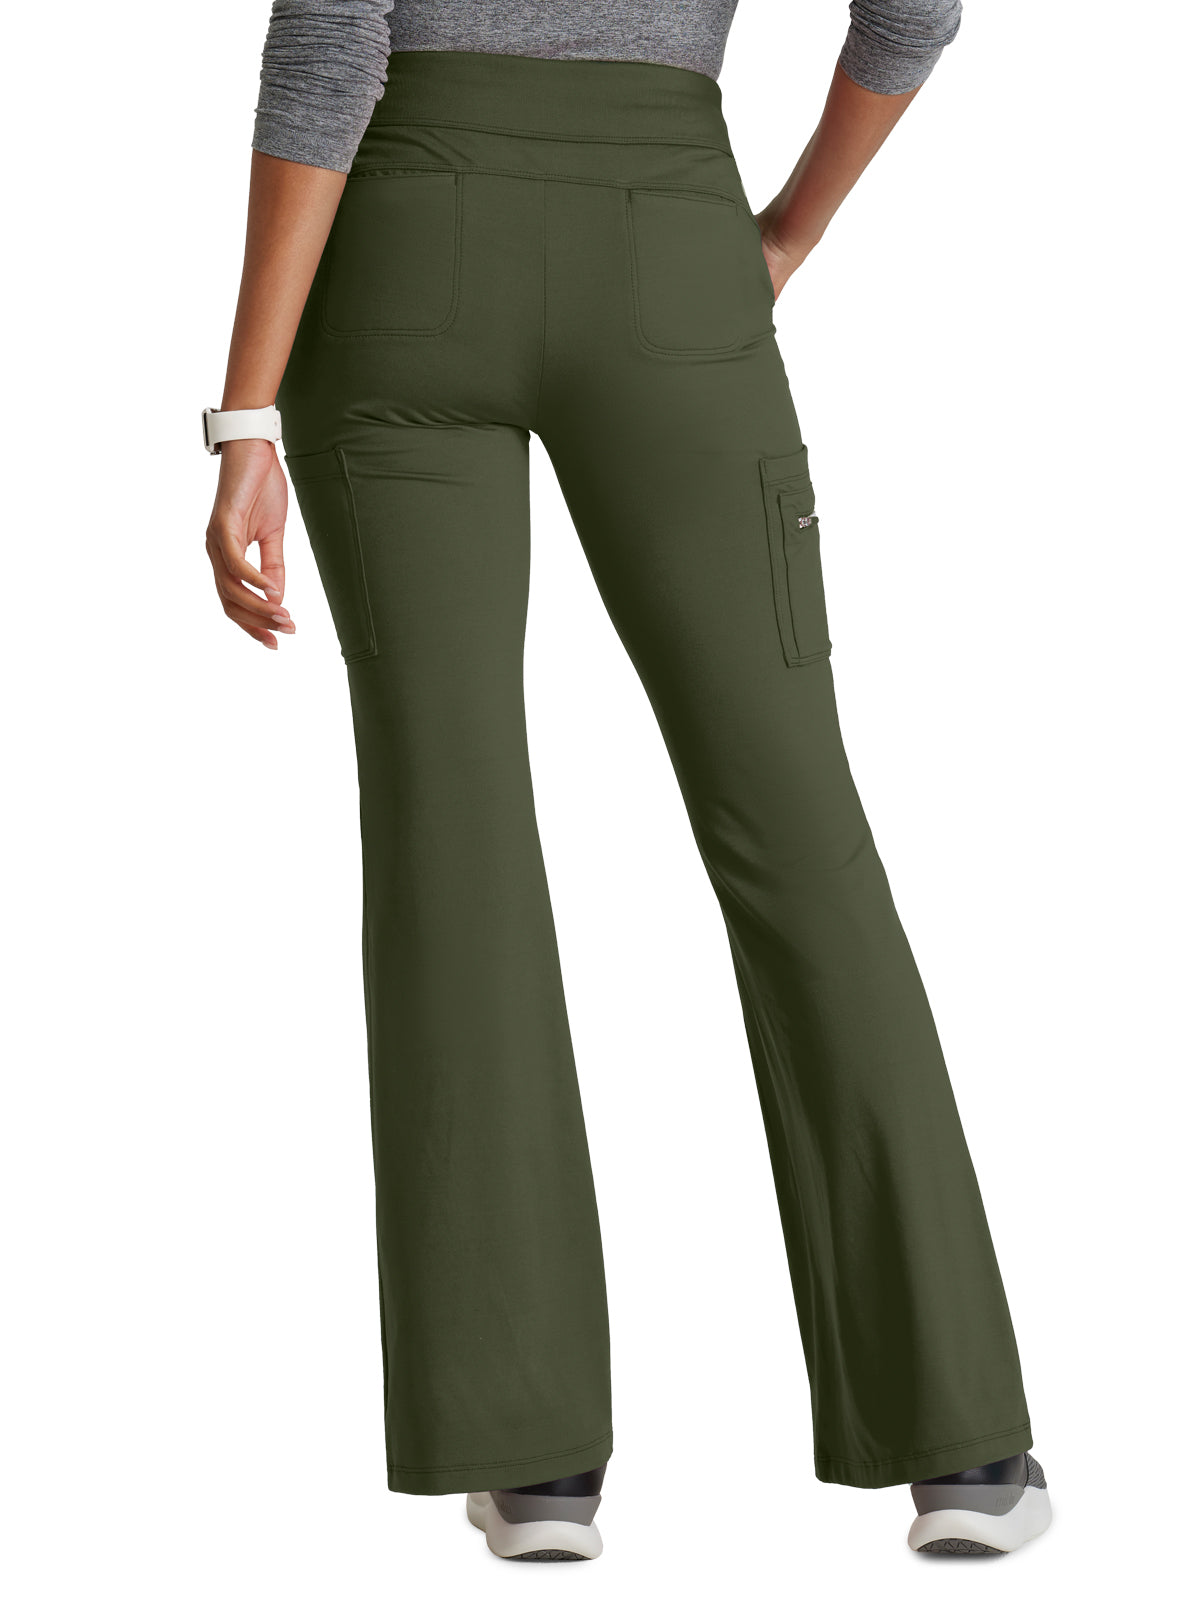 Women's 7 Pocket High-Rise Fit and Flare Scrub Pant